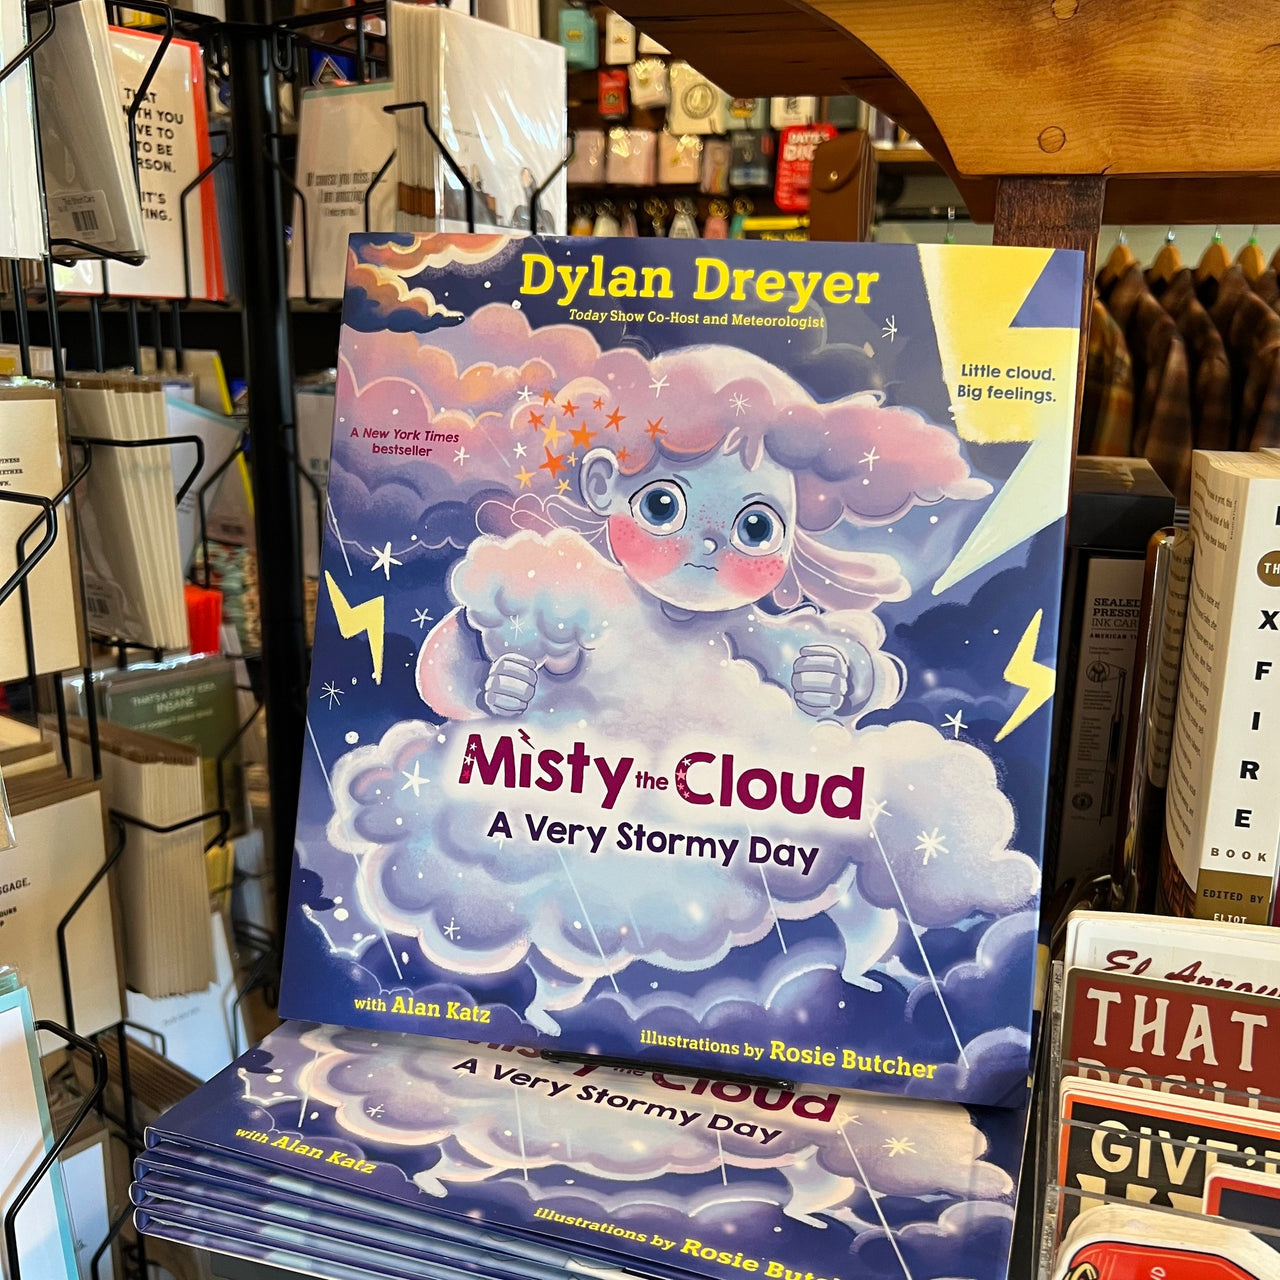 Misty the Cloud: A Very Stormy Day